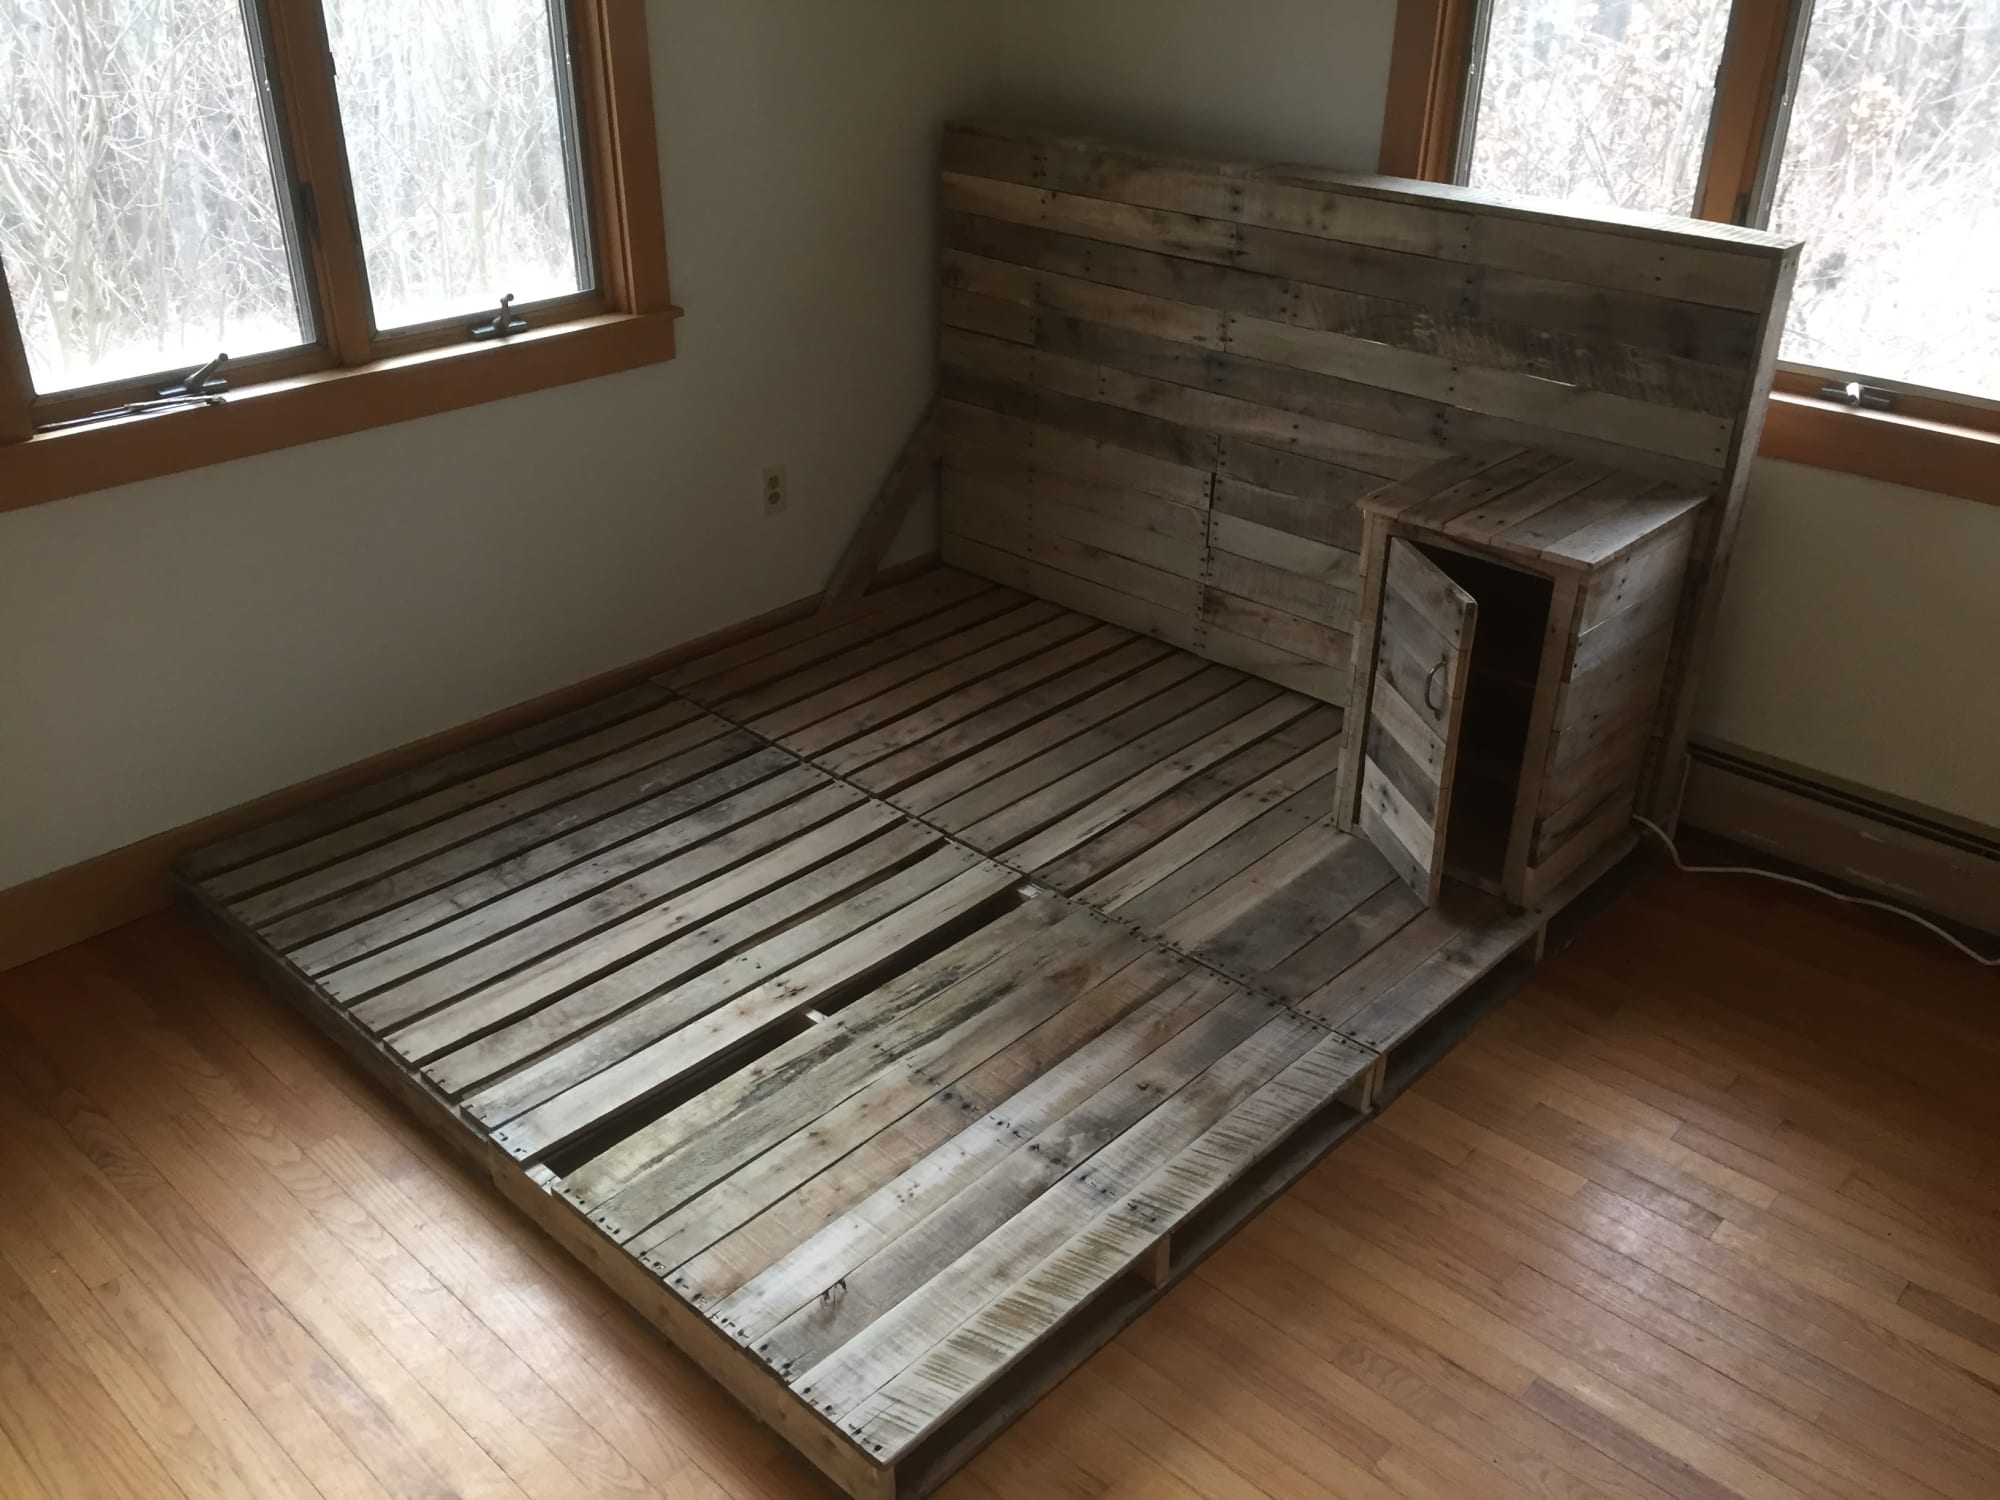 Pallet Bed Frame Queen By Handmades, How To Make A Pallet Queen Bed Frame